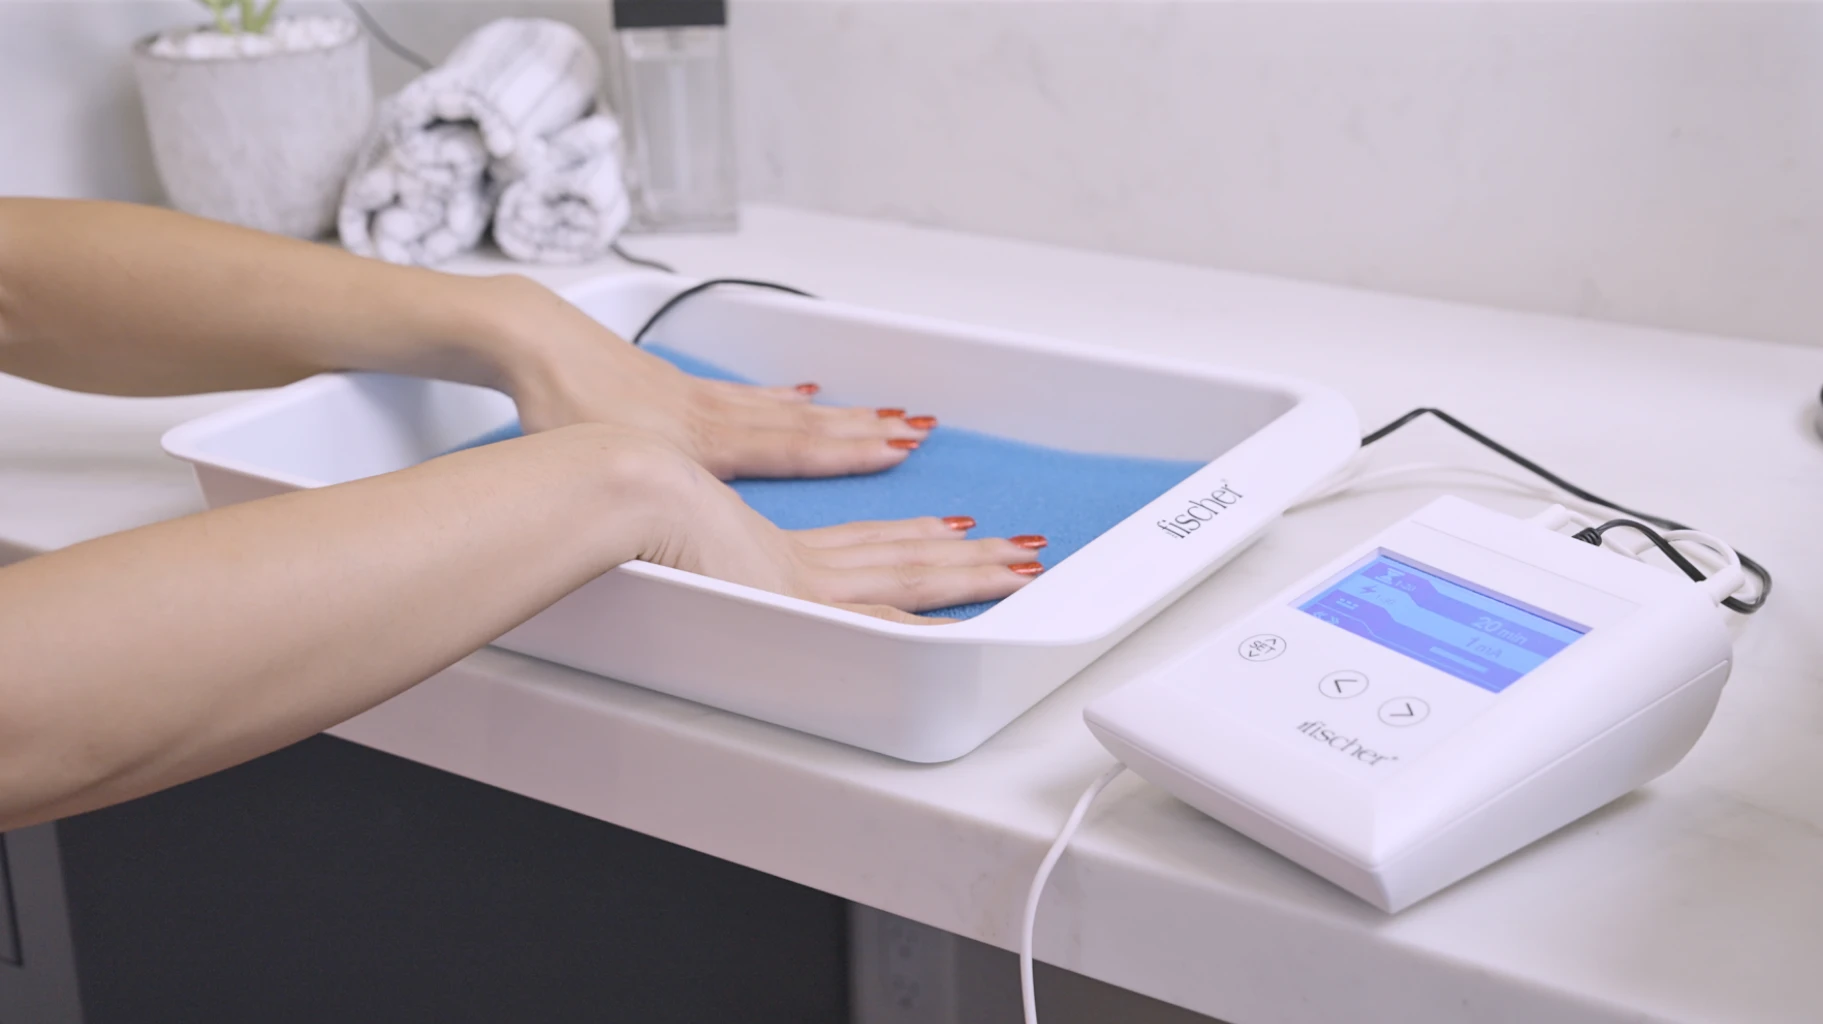 Image: In this photo, we focus solely on the arms and hands of an individual undergoing treatment for palmar hyperhidrosis, characterized by excessive sweating of the hands. They are utilizing RA Fischer Co.'s The Fischer iontophoresis device, placed on a white table. The setup includes white water bath trays, metal-free silicone electrodes with pH-balancing foam within the tray, all set against a clean white backdrop. The Fischer iontophoresis device, distinguished by its white rectangular shape, features a blue and grey screen, with buttons labeled "SET" and directional arrows. The logo of the Fischer device is discreetly positioned in the bottom right corner.